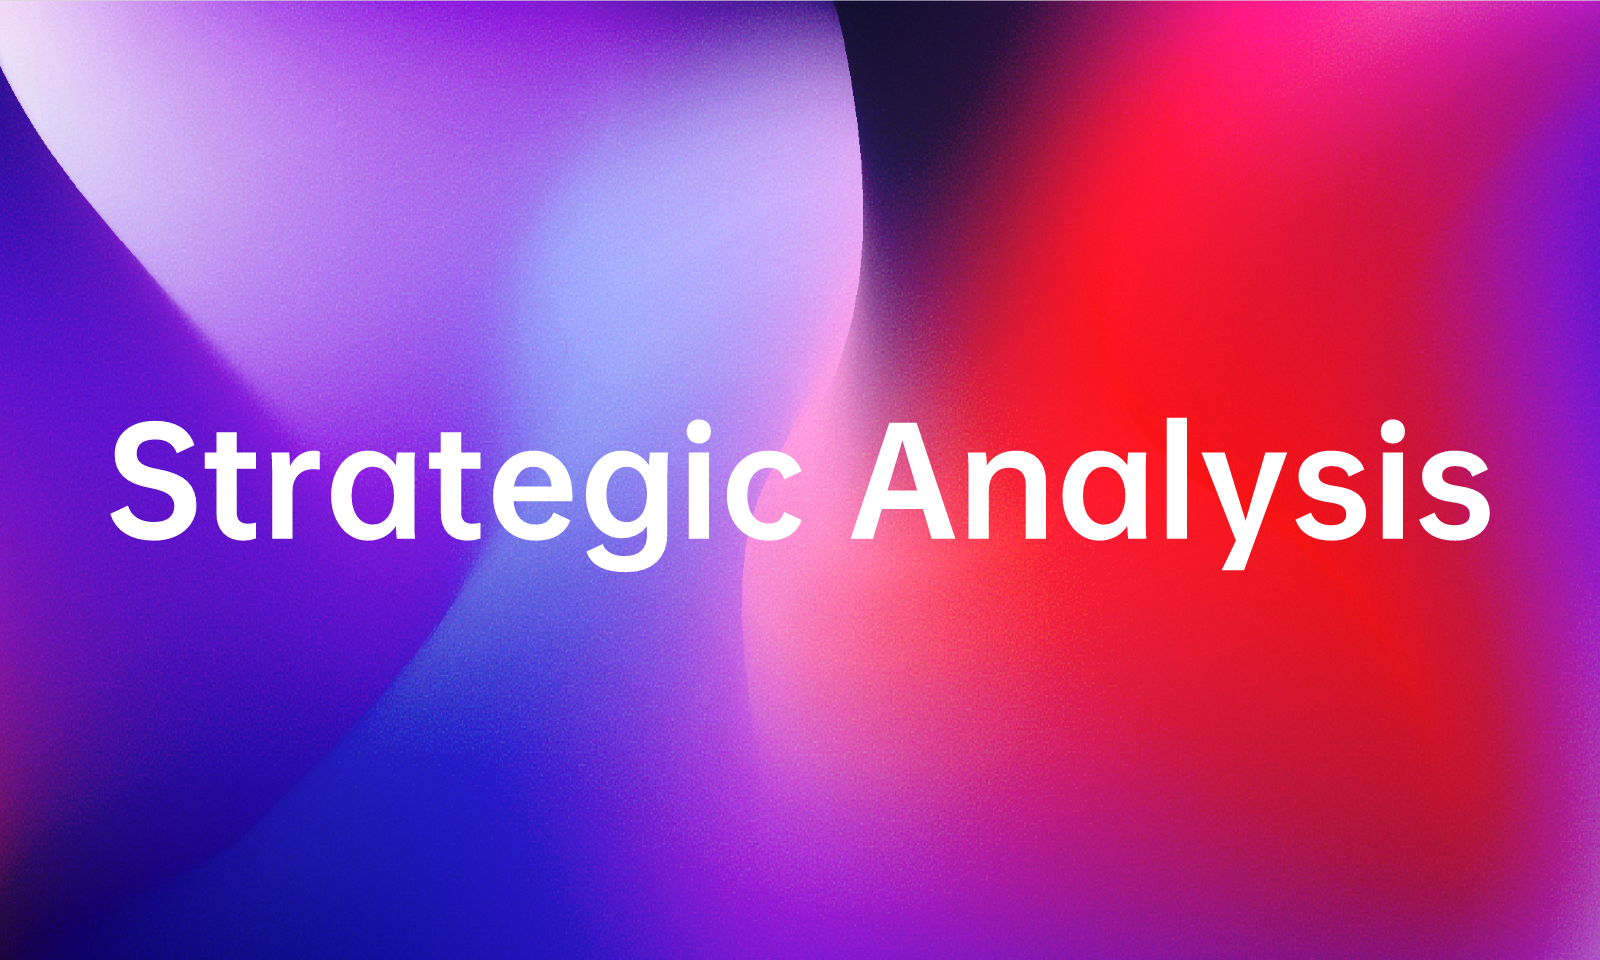 [Full Guide] Strategic Analysis - What You Need to Know